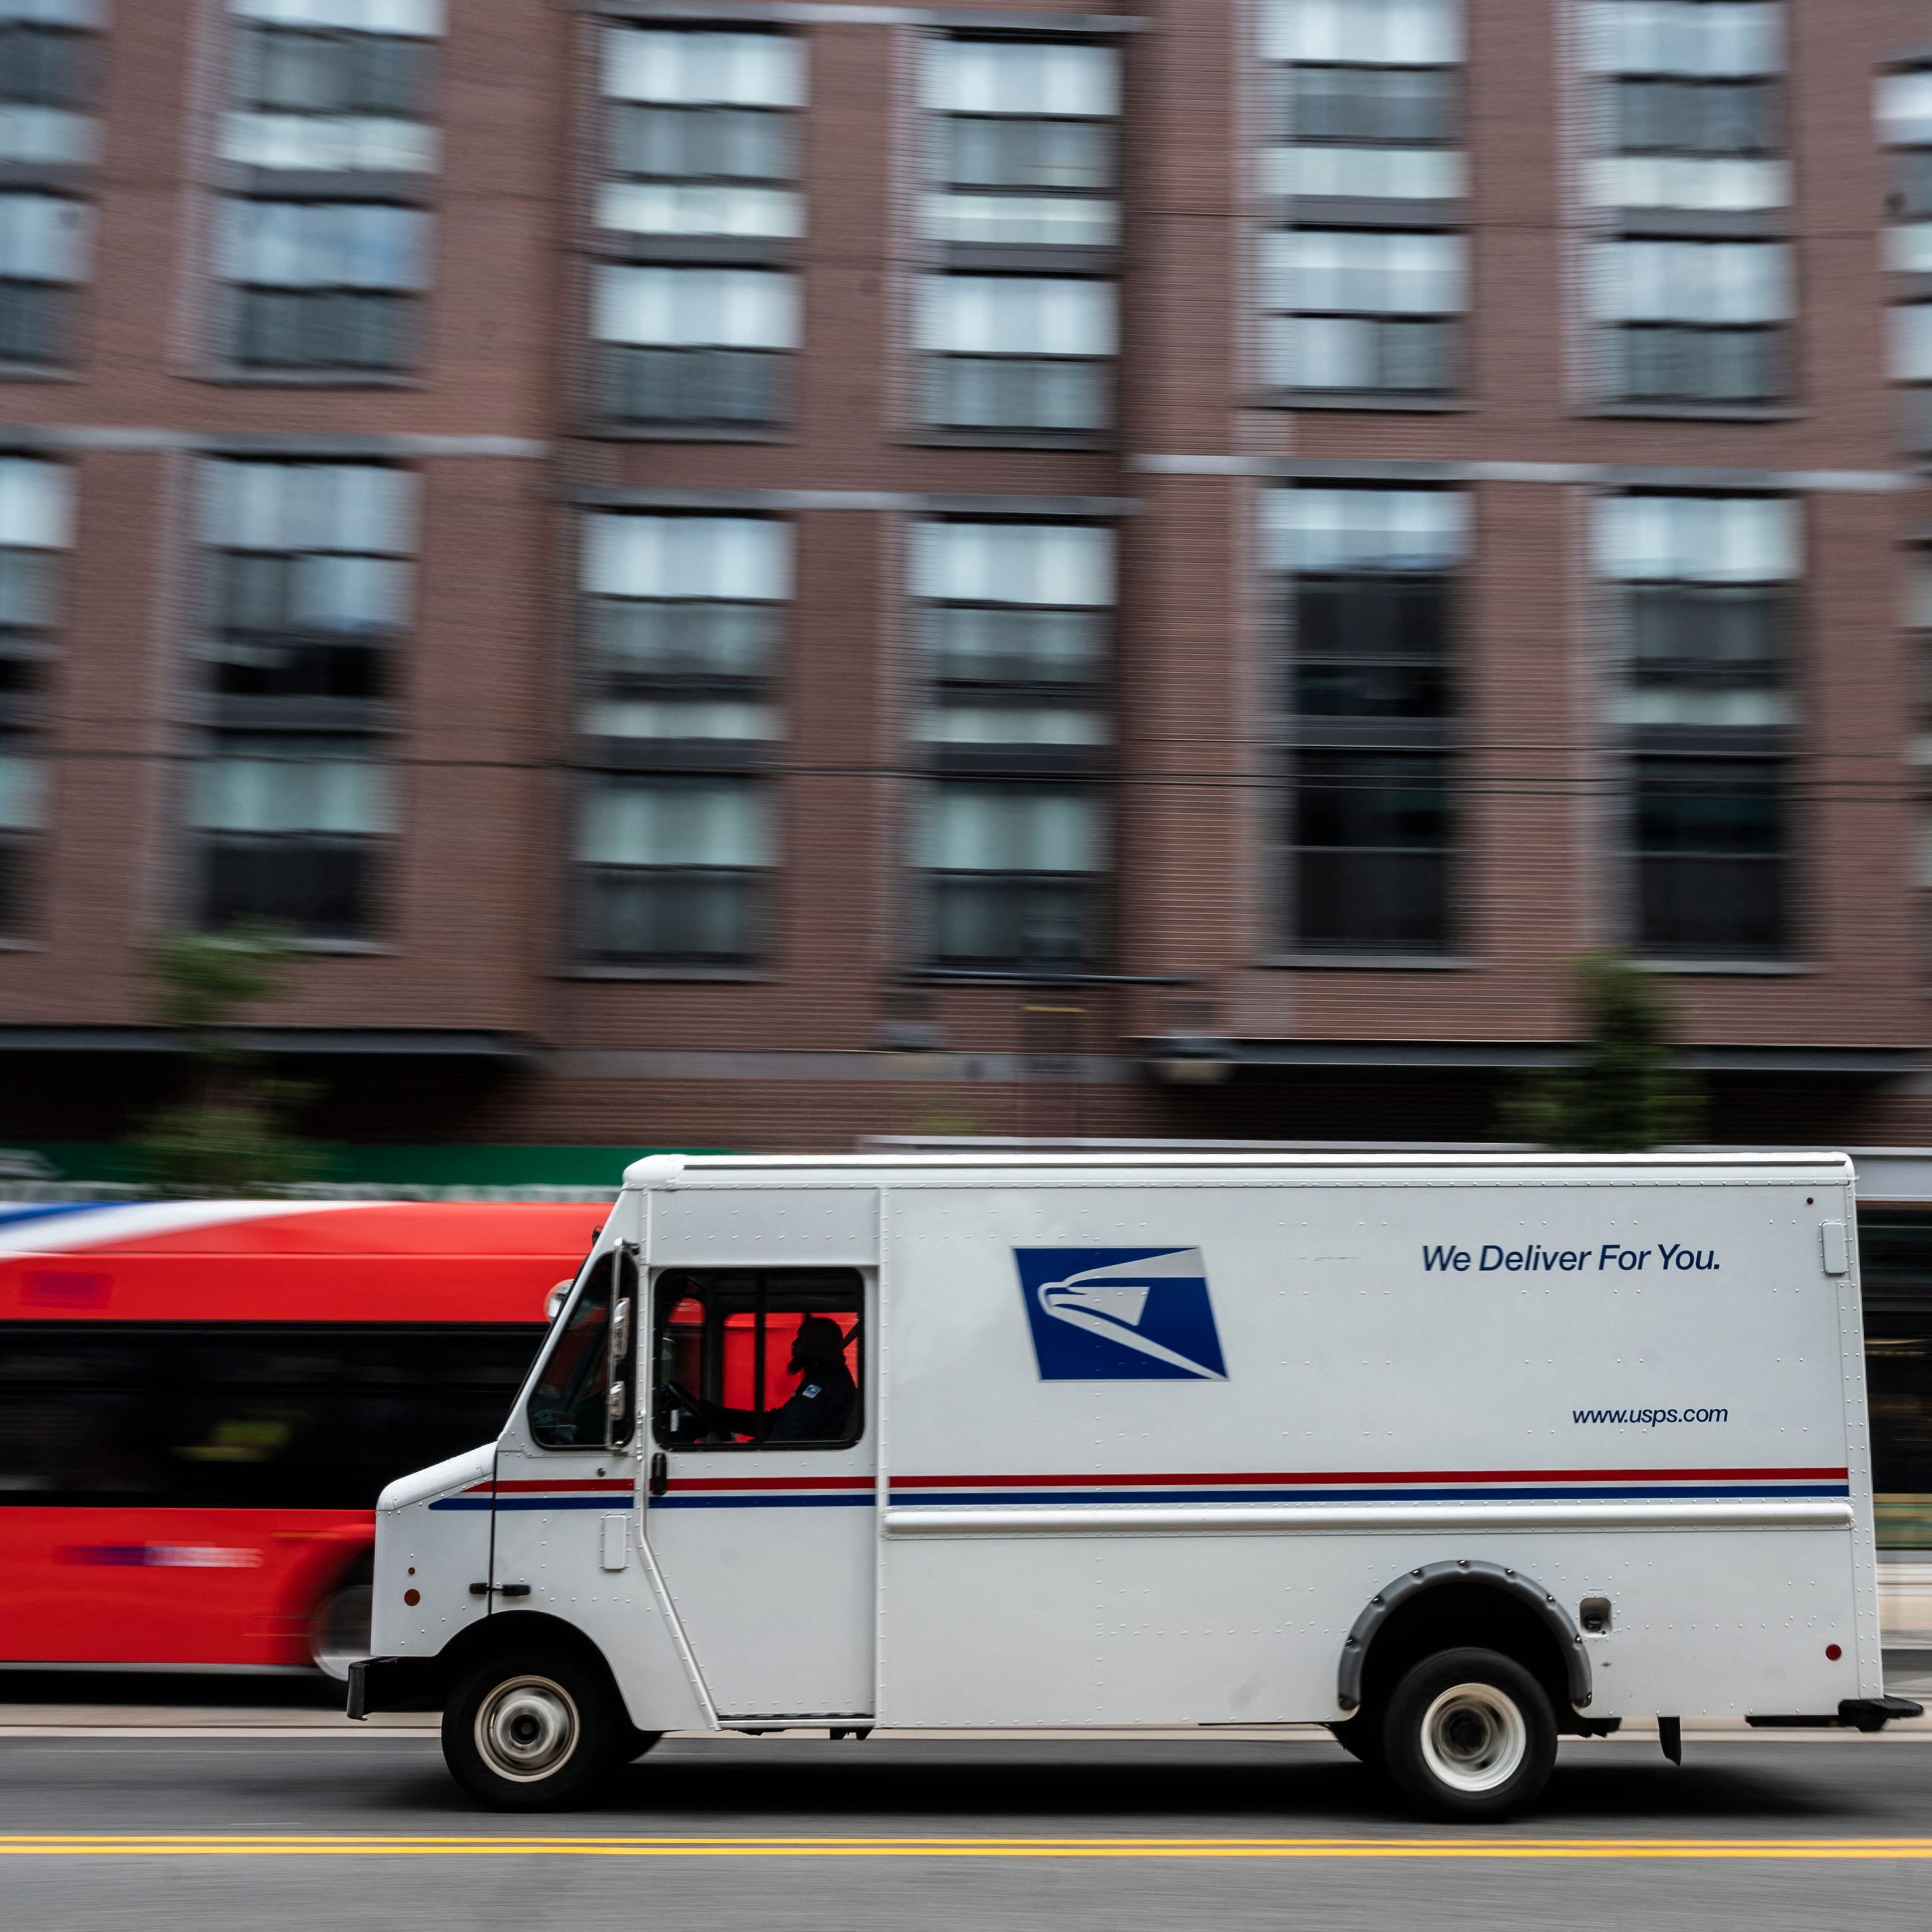 A postman drives a United States Postal service (USPS) mail delivery truck through Washington, DC on August 13, 2021. (Photo by ANDREW CABALLERO-REYNOLDS / AFP) (Photo by ANDREW CABALLERO-REYNOLDS/AFP via Getty Images) ORG XMIT: 0 ORIG FILE ID: AFP_9L433M.jpg